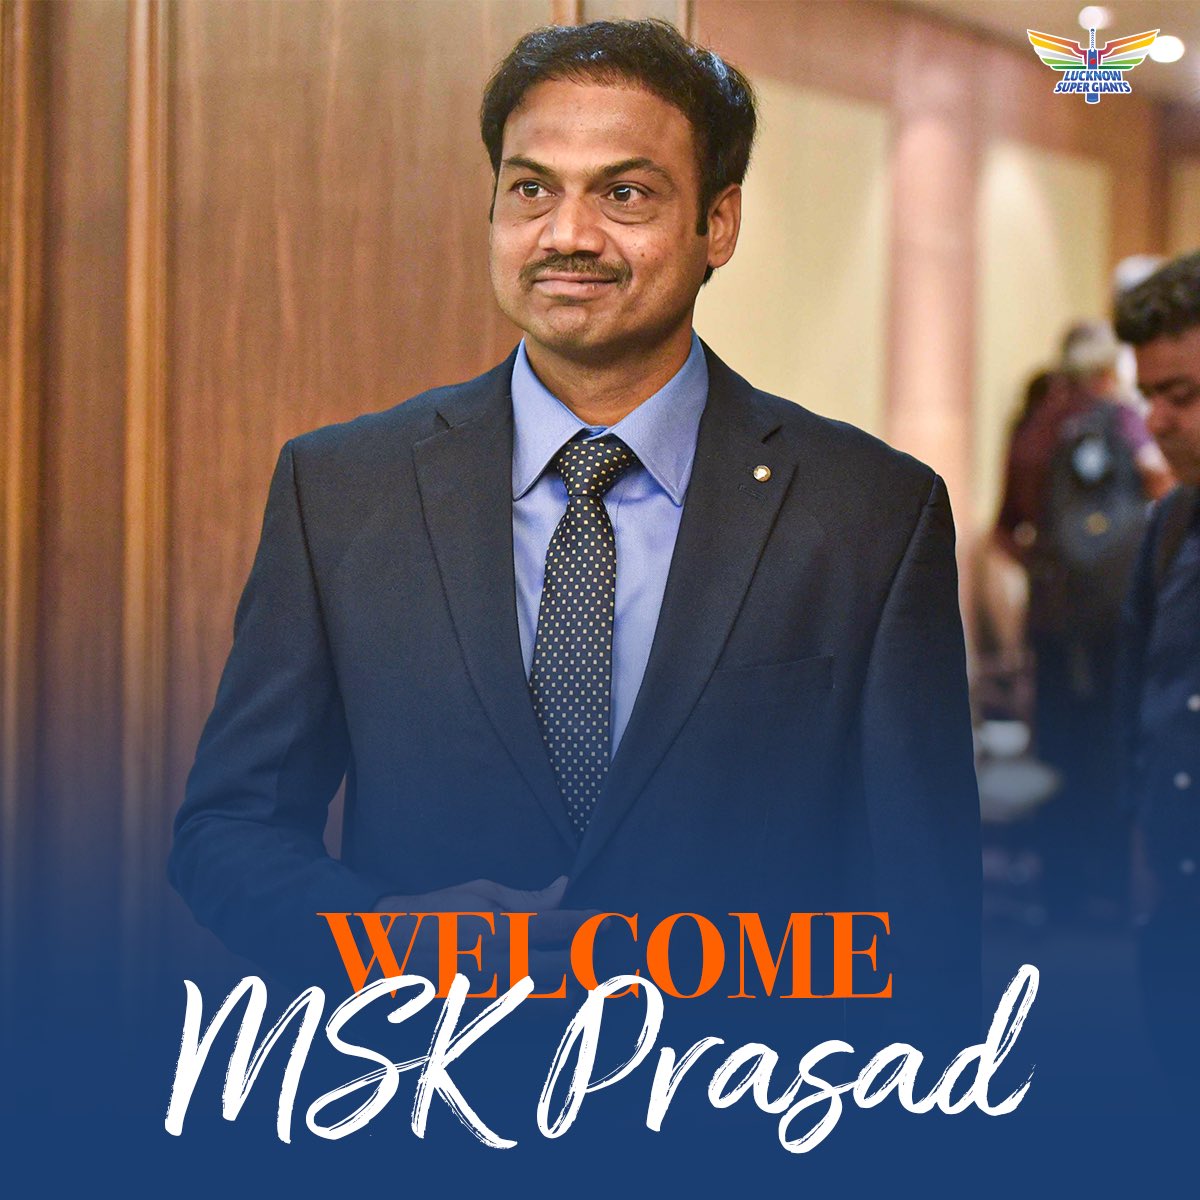 Former India cricketer MSK Prasad joins the Super Giants as our Strategic Consultant! 🤝 Full story 👉 lucknowsupergiants.in/news/msk-prasa…